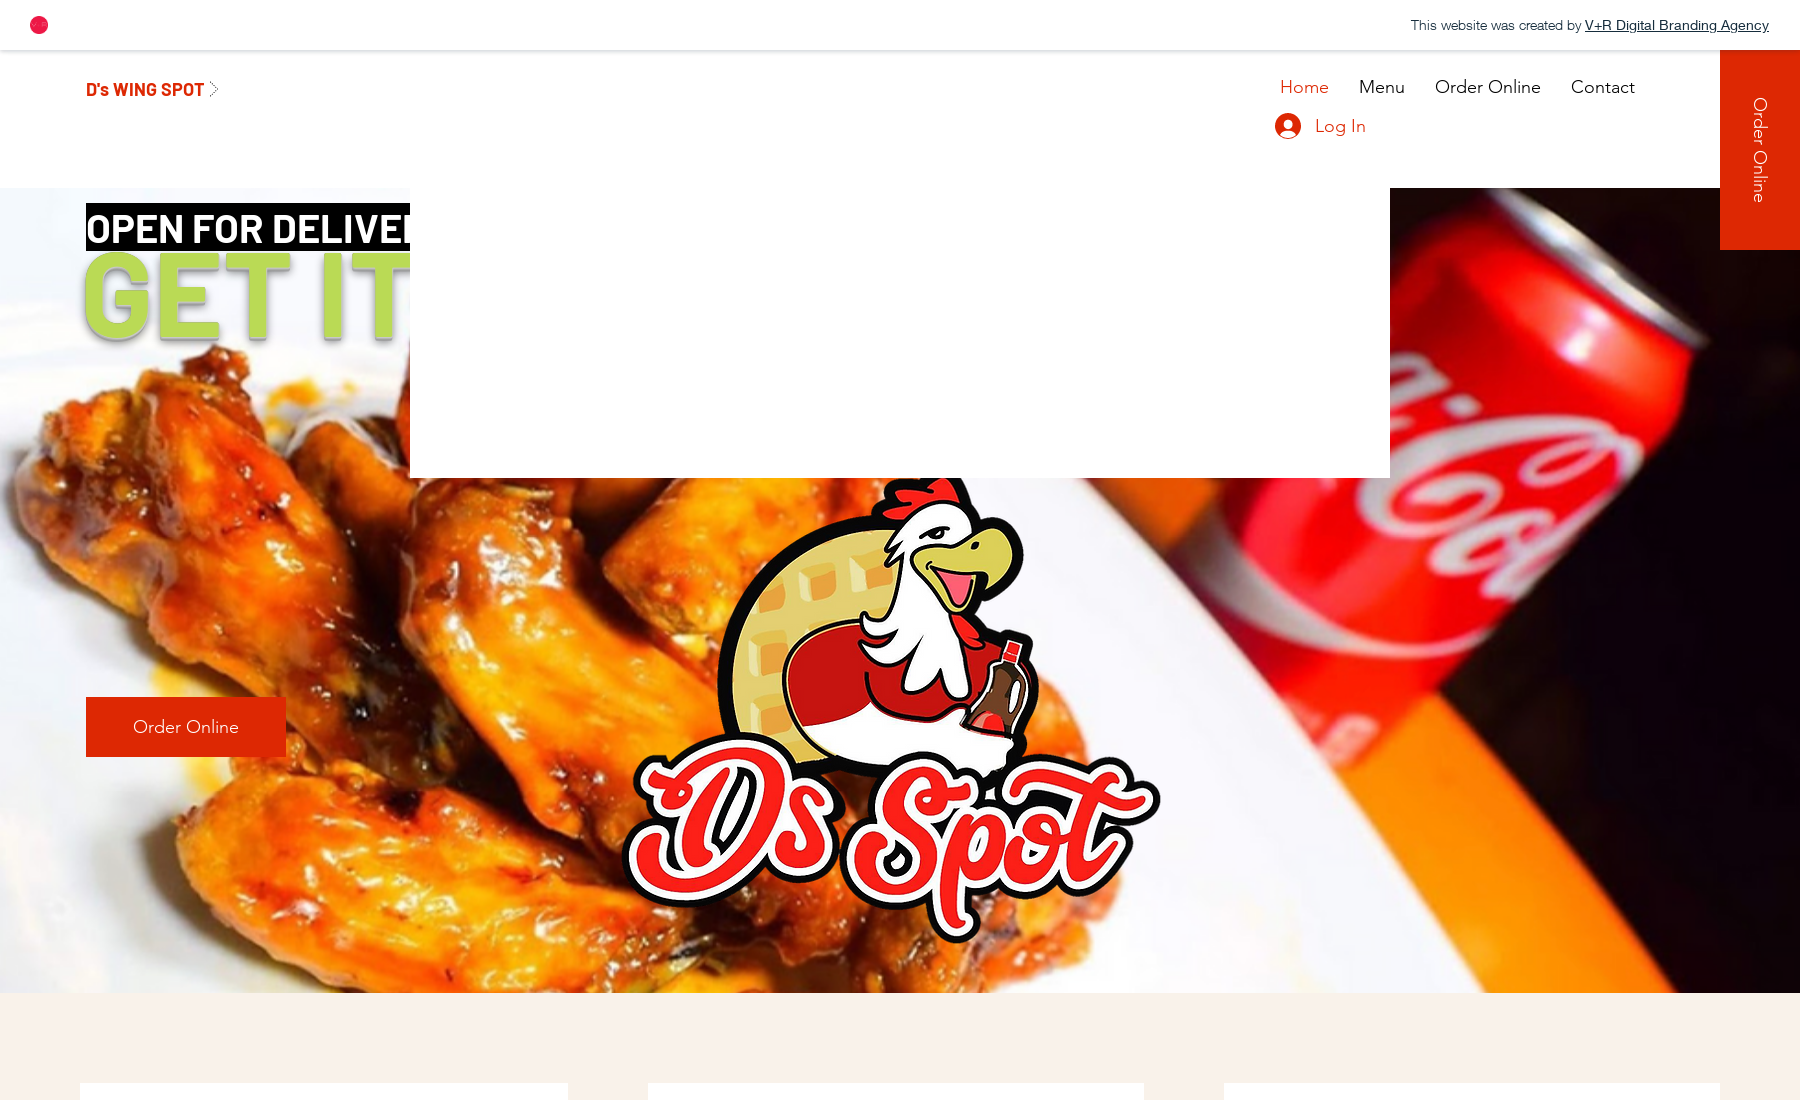 D's Wing Spot: Popular chicken wing restaurant based out of Providence, RI that specializes in Chicken & Waffles, Tostones & of course wings!